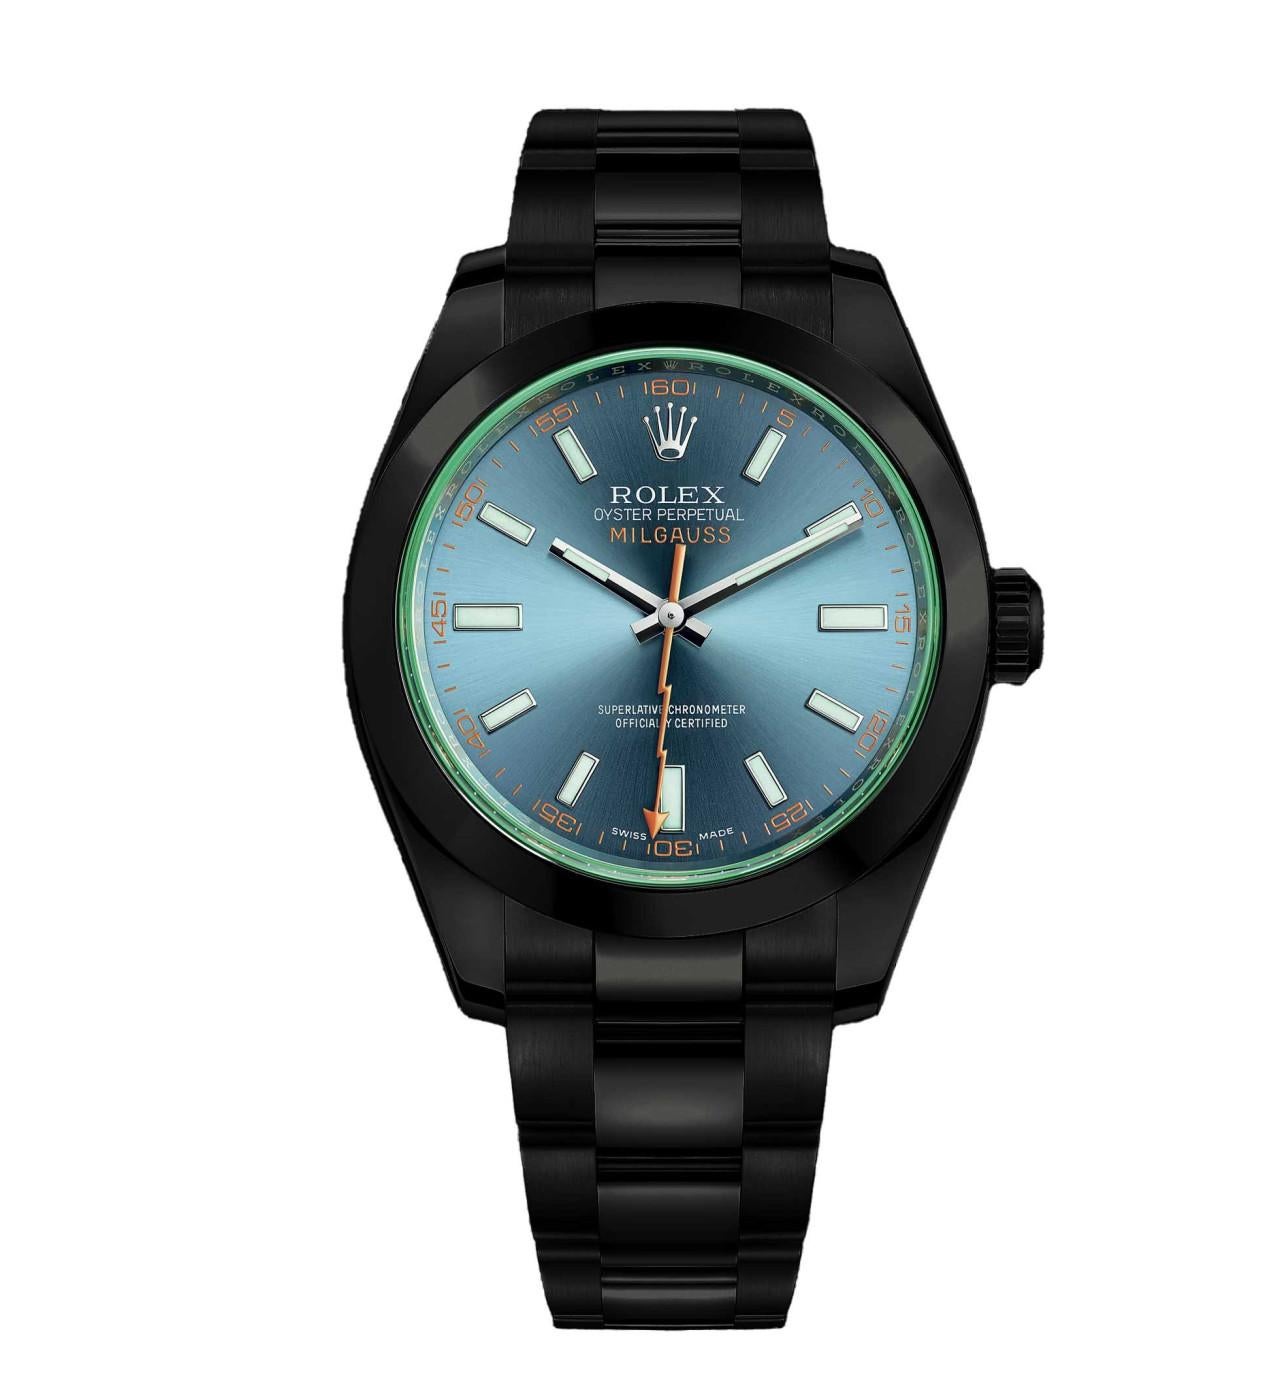 Rolex Milgauss Green Crystal Blue Dial Black PVD/DLC Stainless Steel Watch 11640

Watch has been professionally polished and coated with PVD/DLC coating. It has never been worn after customization.